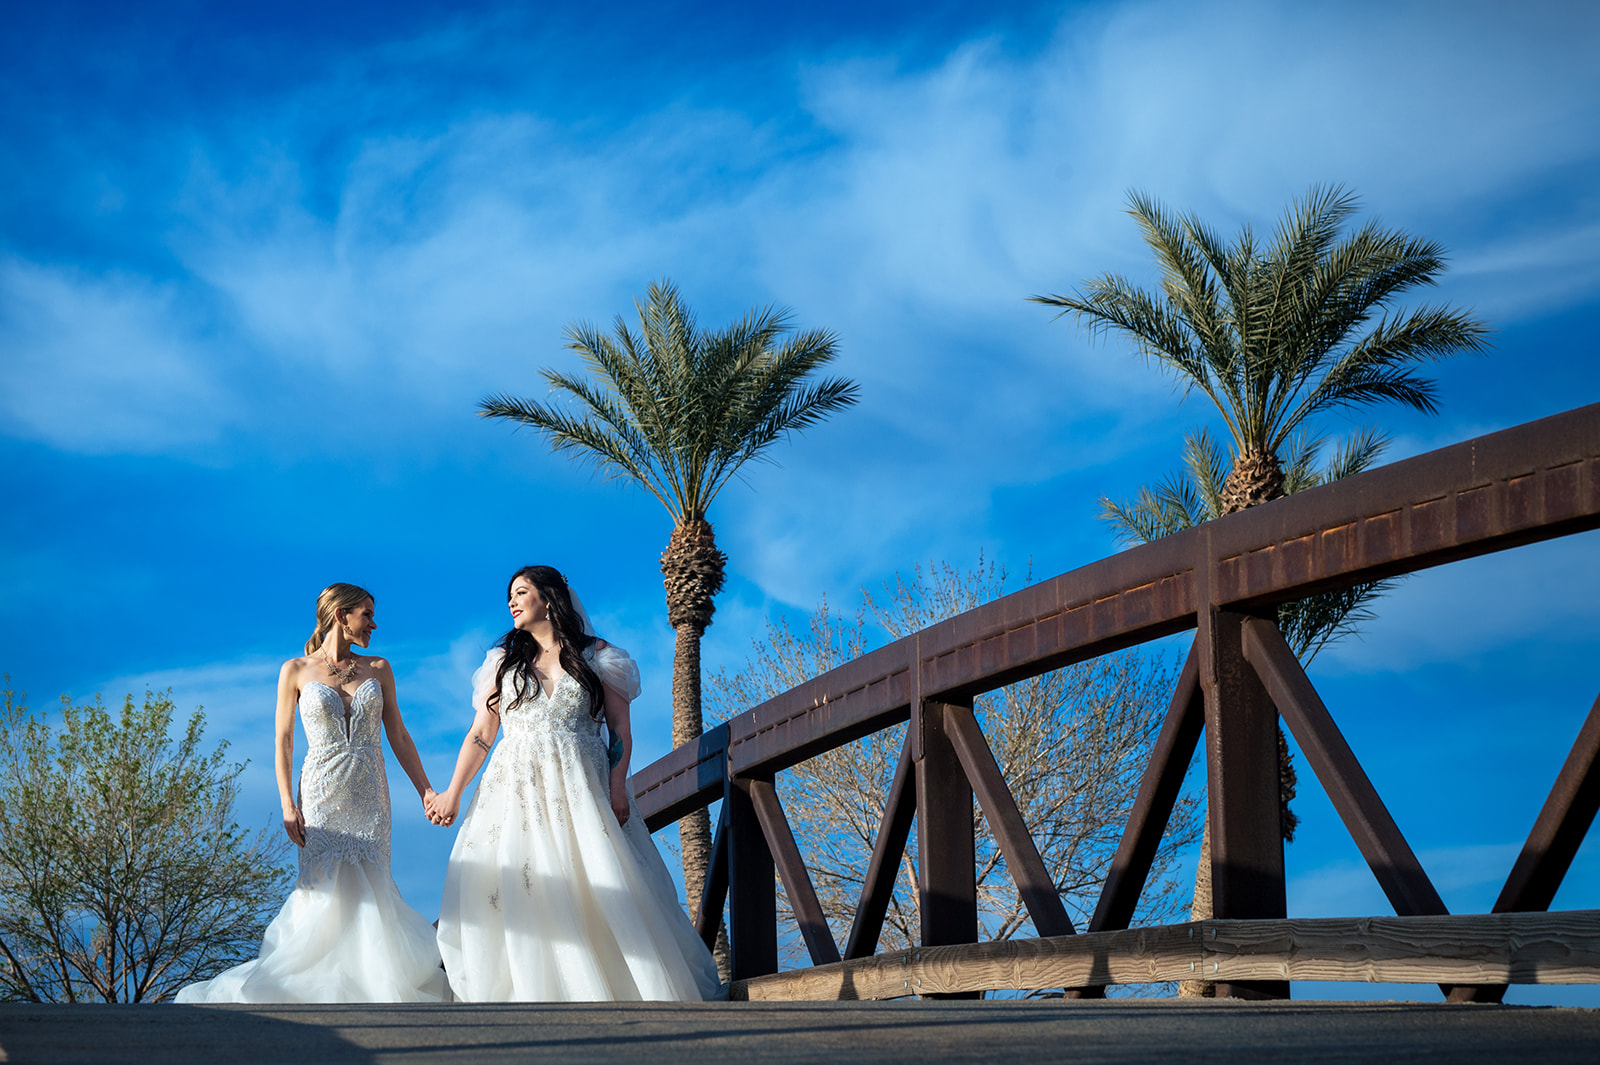 Two brides holding hands in a desert photo in Las Vegas